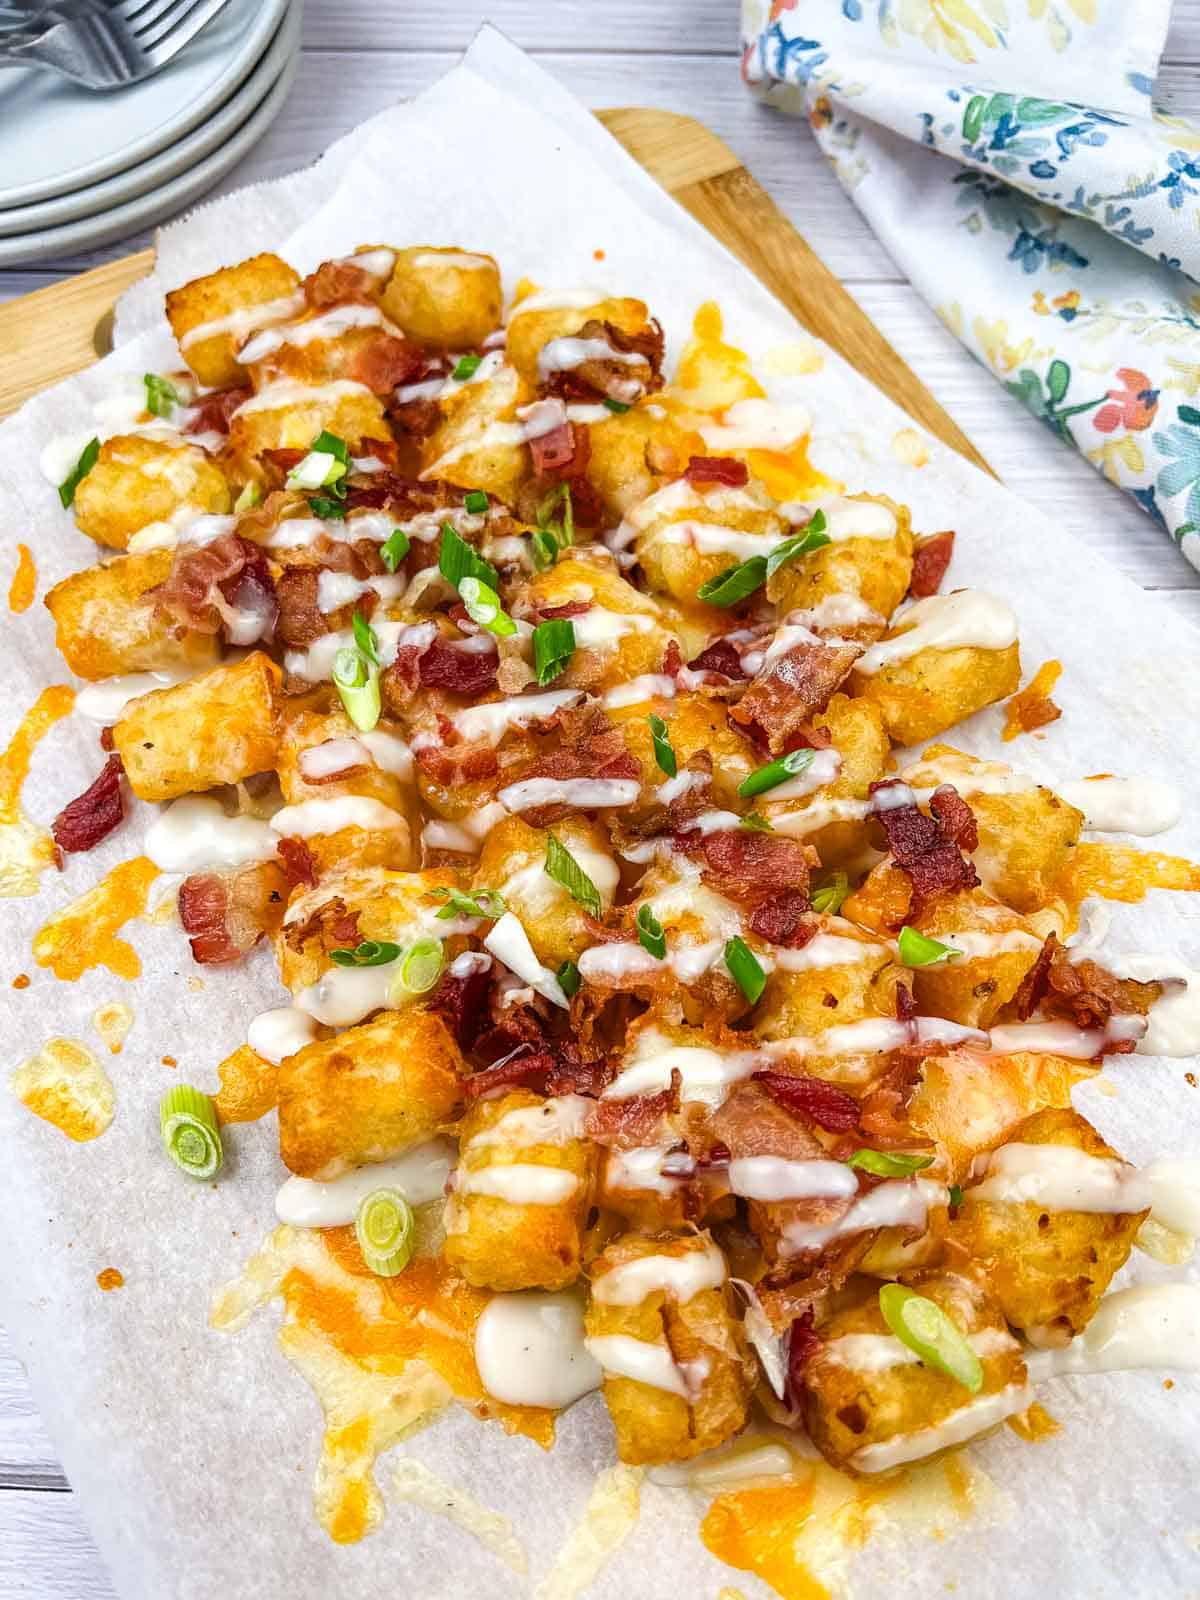 A serving of loaded tater tots topped with melted cheese, bacon bits, and green onions, and drizzled with Alfredo sauce on a wooden board.